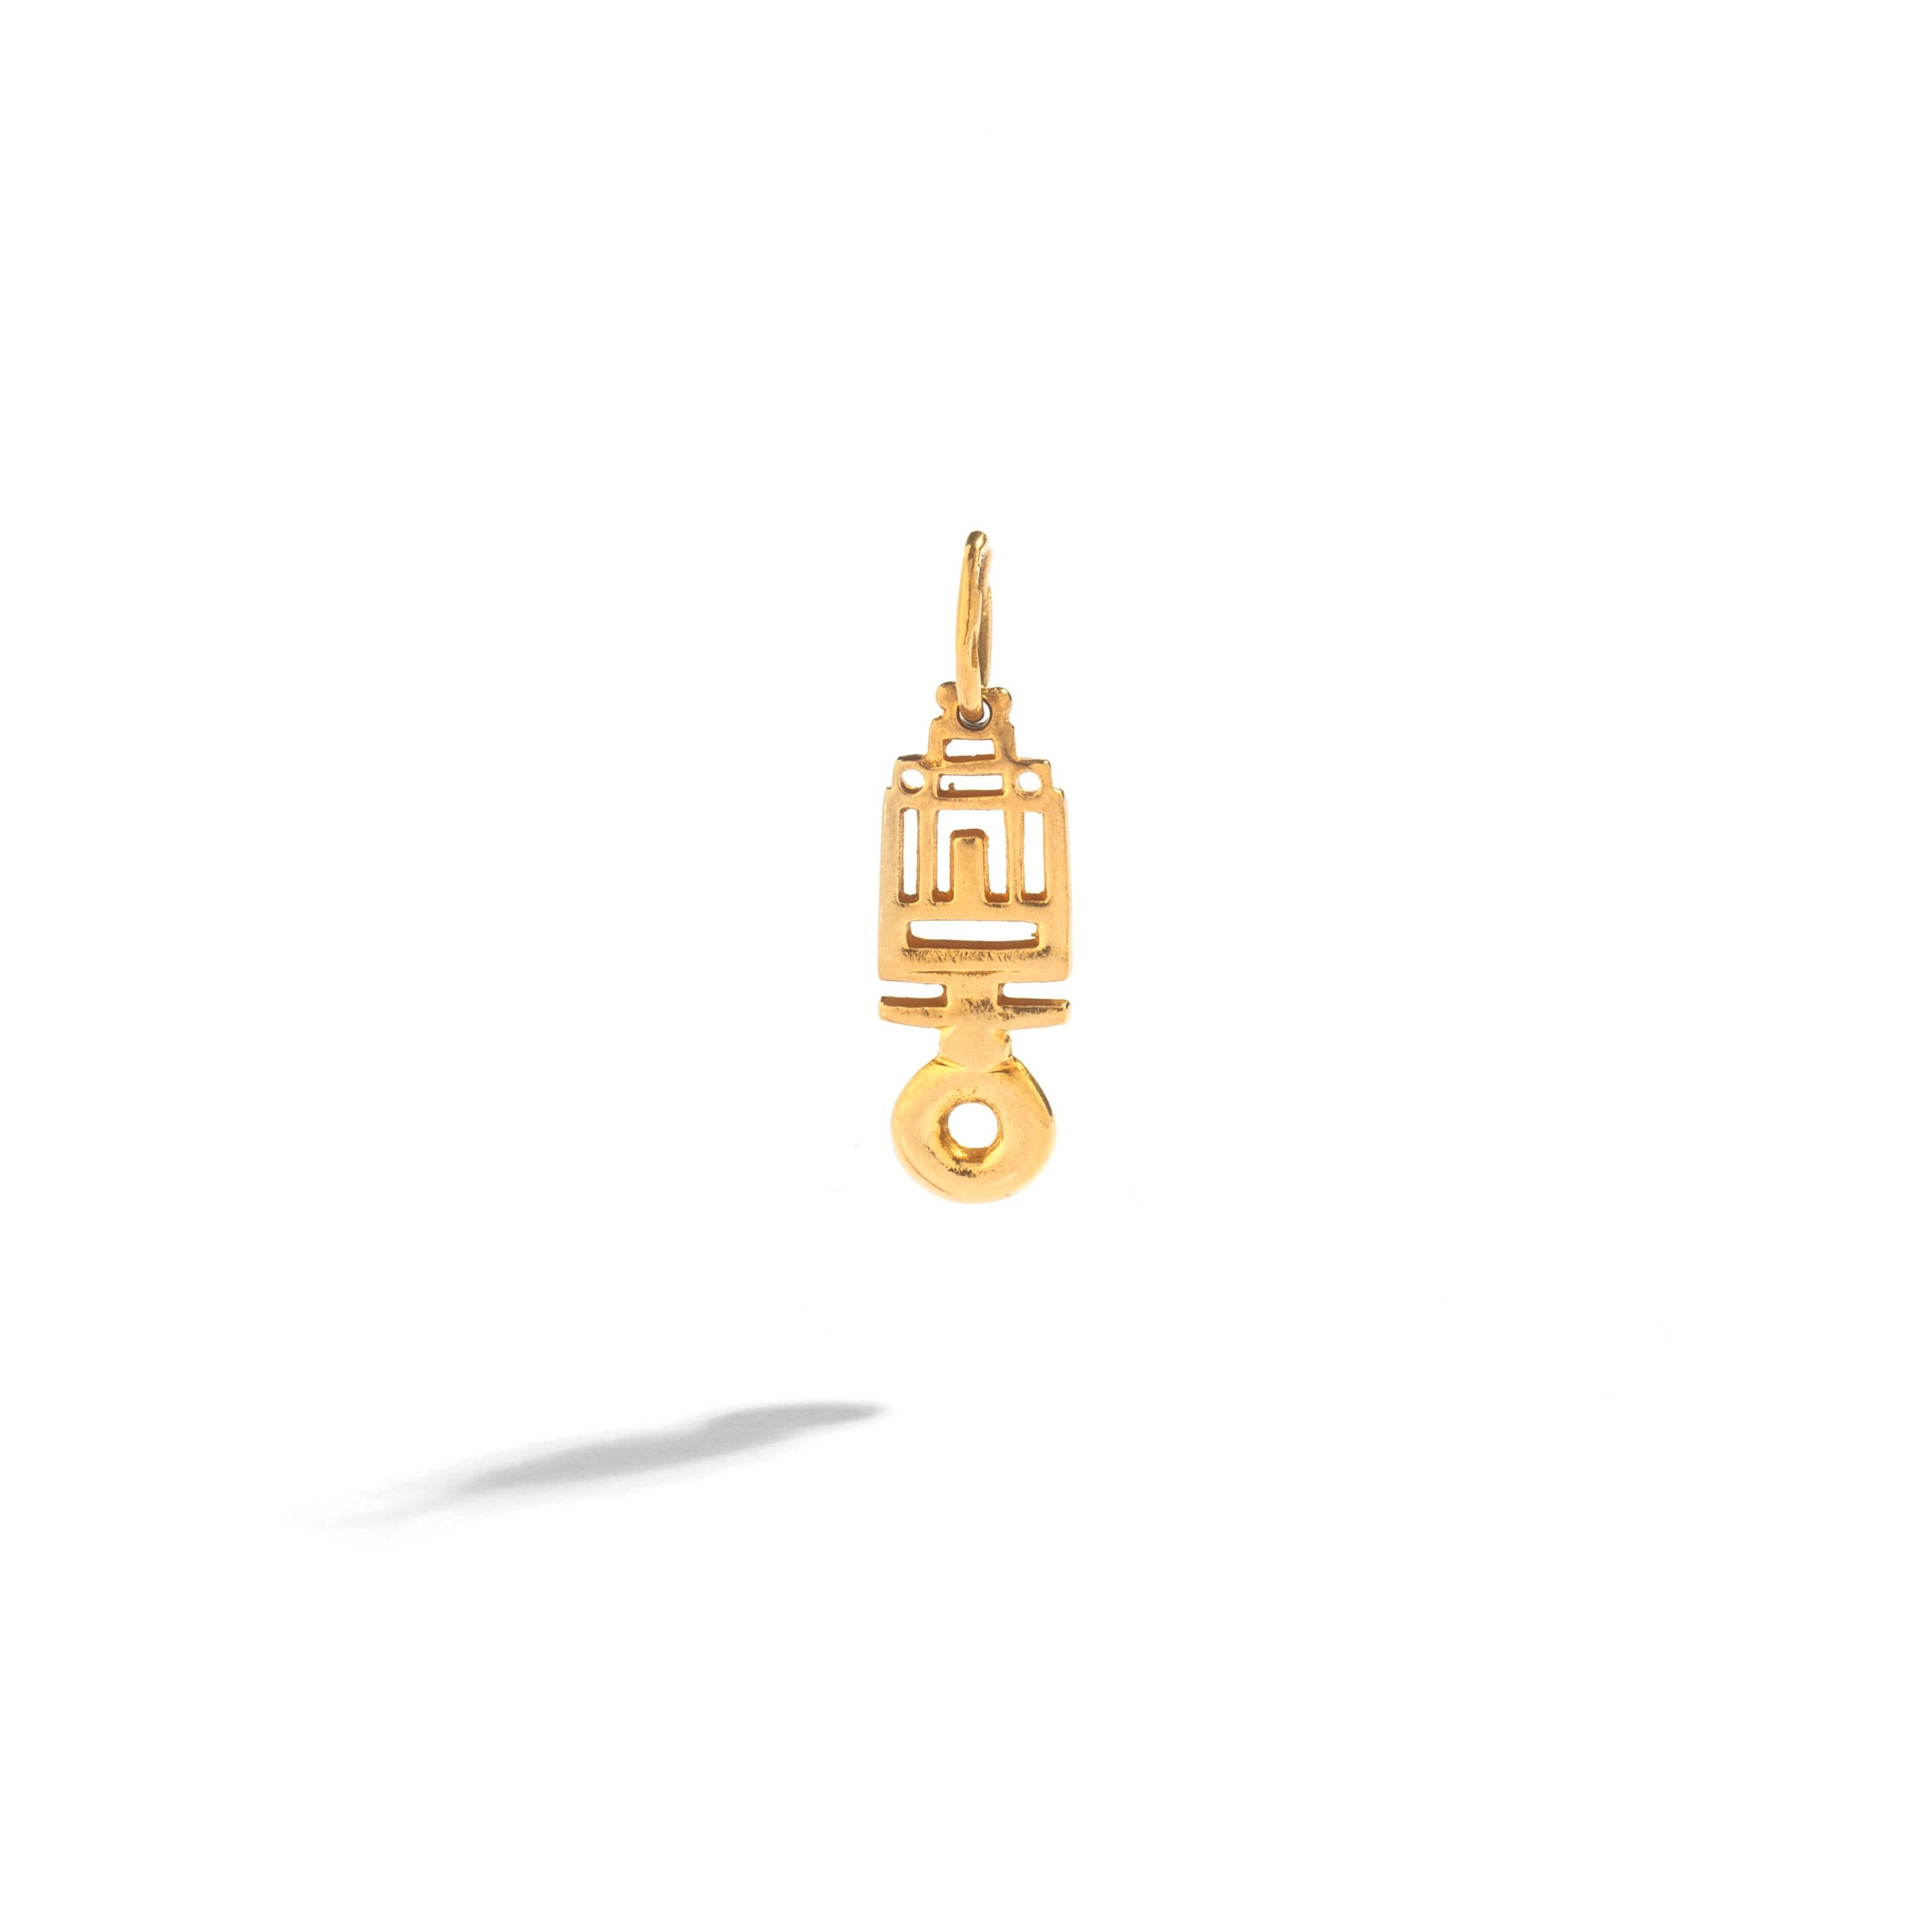 Immerse yourself in the allure of ancient Egypt with our Egyptian Hieroglyphic Symbol Yellow Gold Pendant Charm. Inspired by the captivating era of the pharaohs, this pendant charm encapsulates the essence of Egyptian revival.

Crafted with the